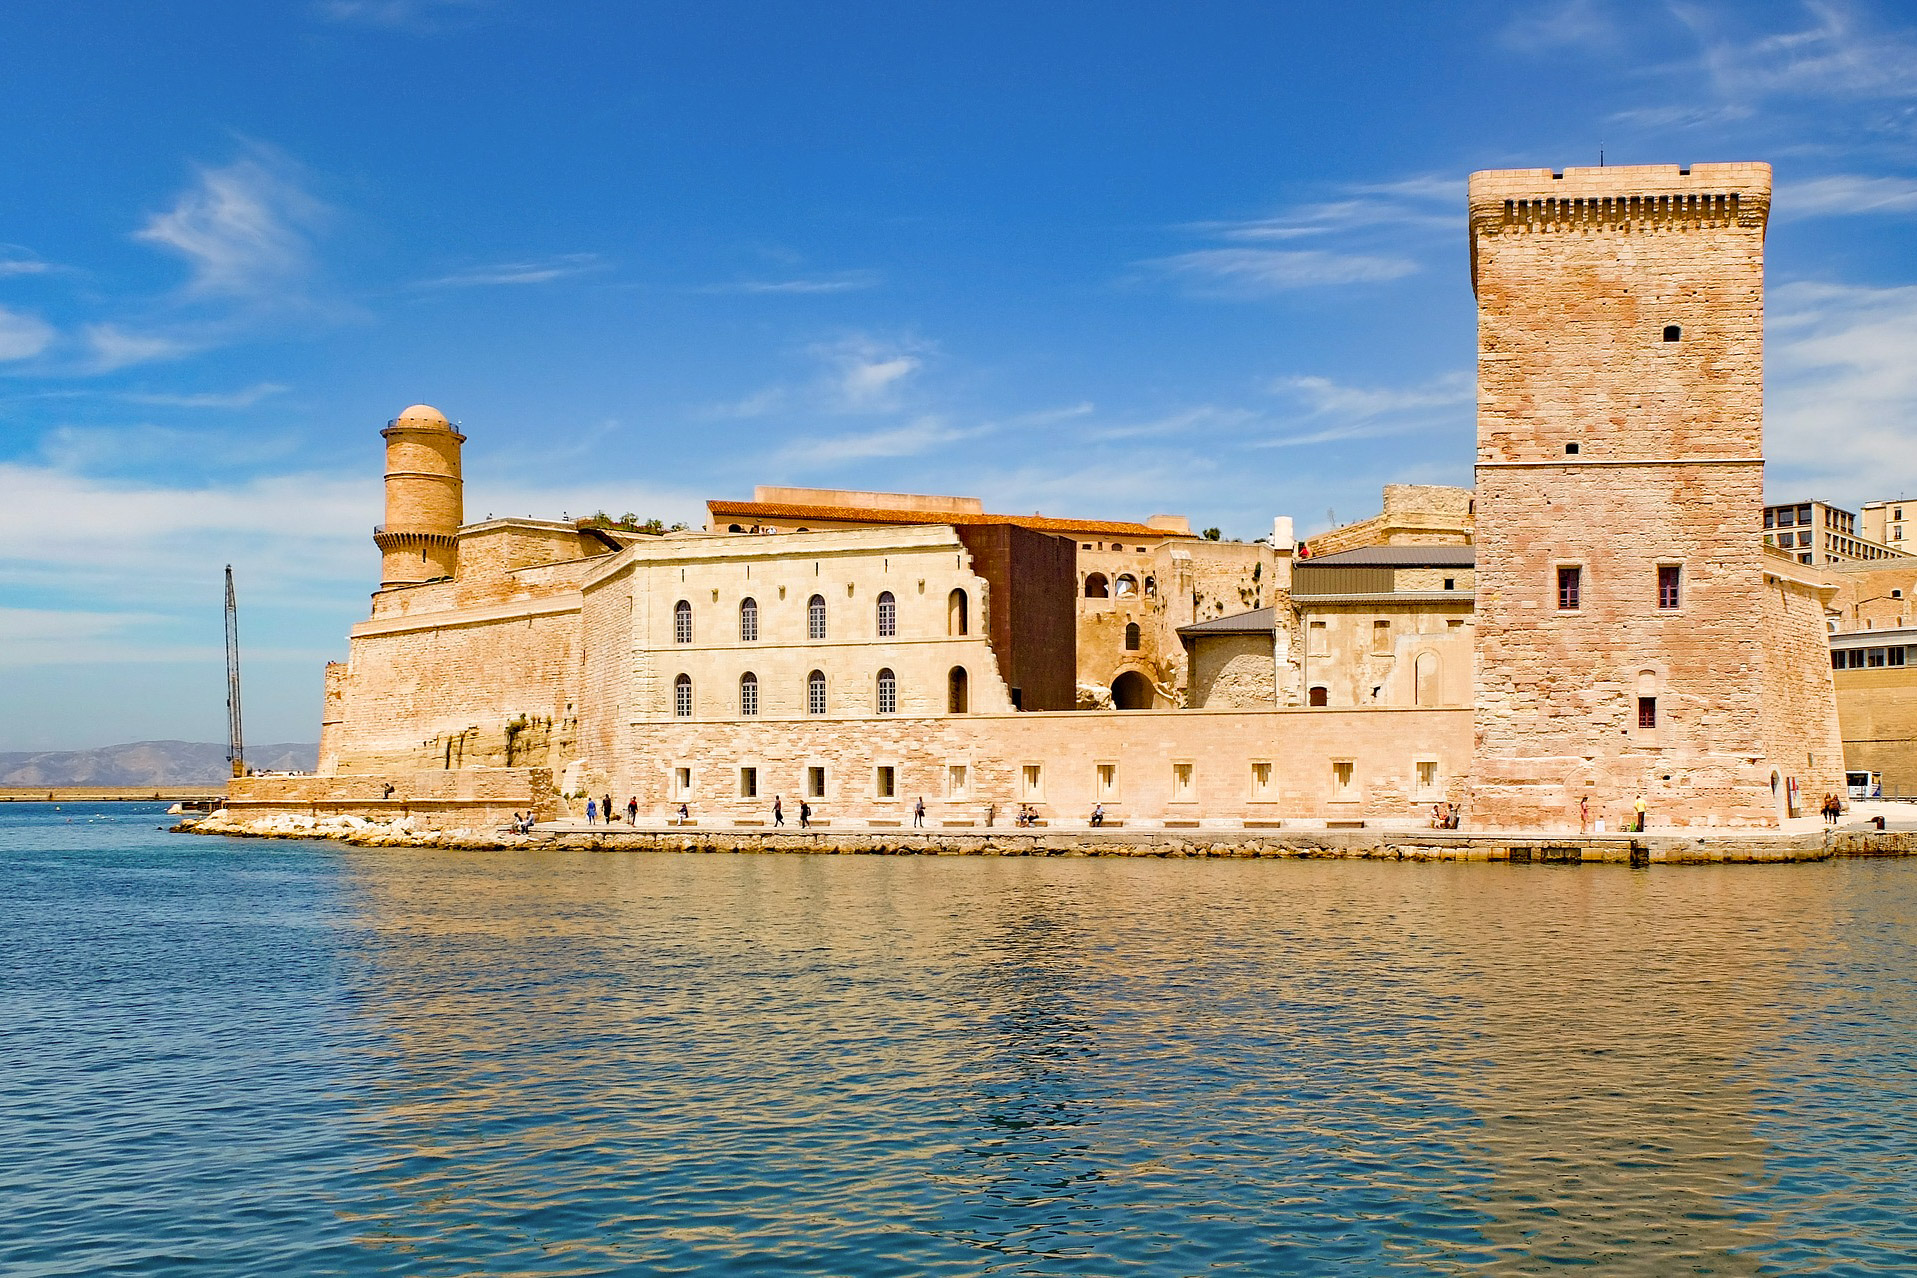 The Ultimate French Revolution Road Trip Fortress Fort Saint Jean In Marseille2754323 1920